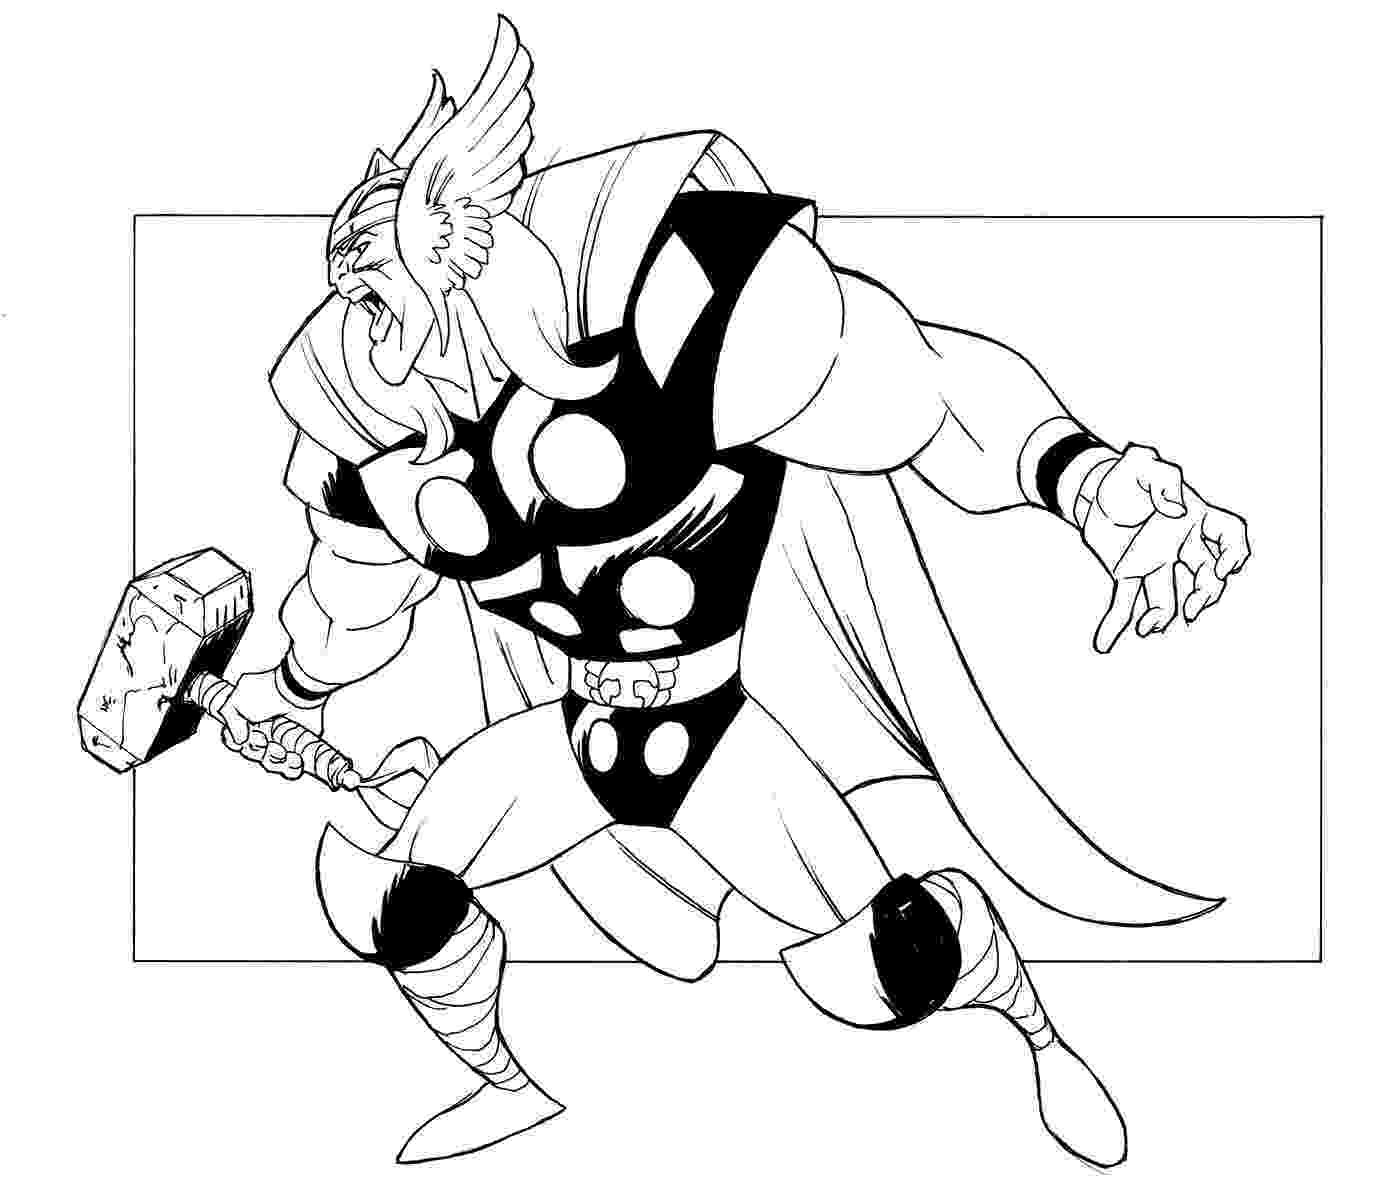 thor coloring sheet free printable thor coloring pages for kids sheet coloring thor 